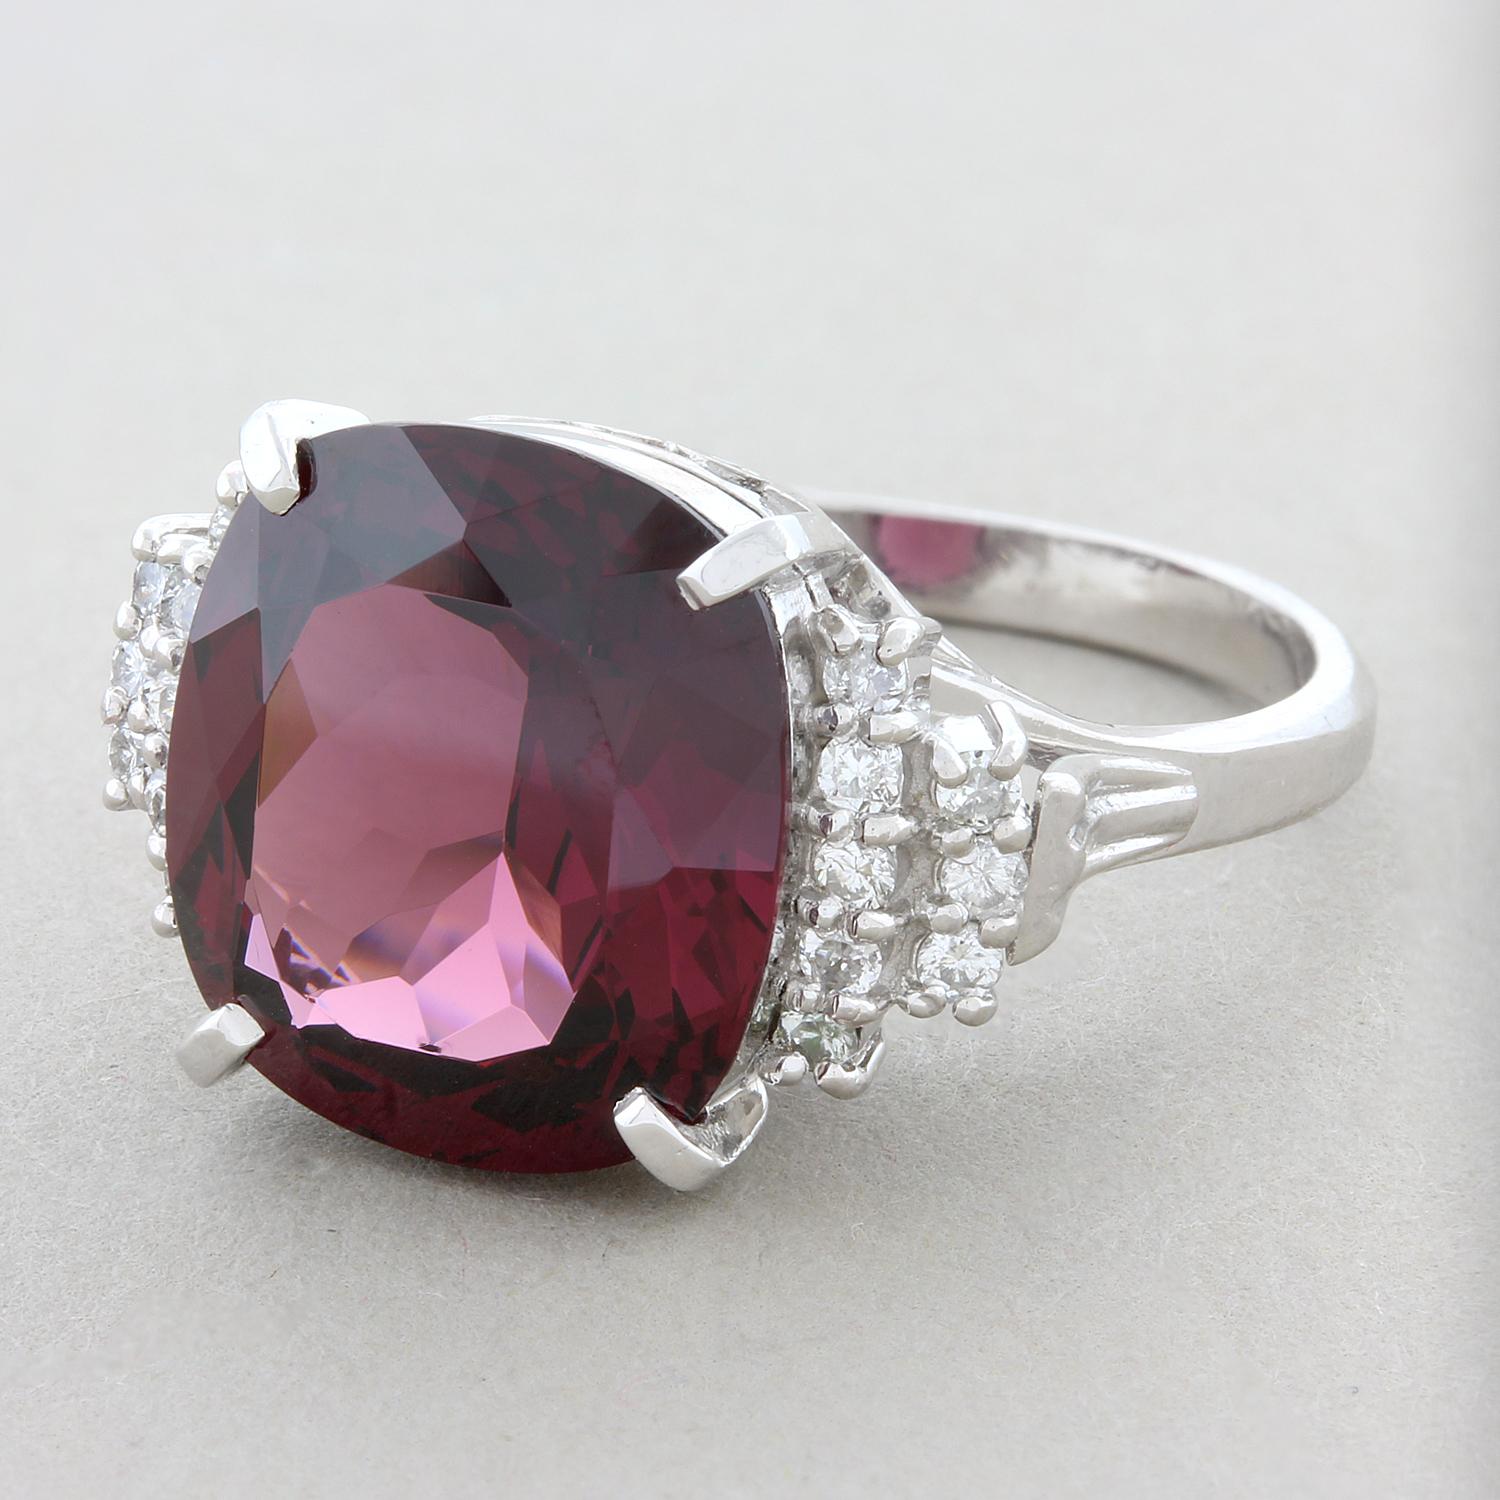 A vivacious 8.15 carat deep purplish red garnet in a platinum setting. The cushion cut garnet is accented with a staircase of round cut diamonds on each shoulder weighing 0.23 carats. The craftsmanship of this ring parallels the brilliance of this